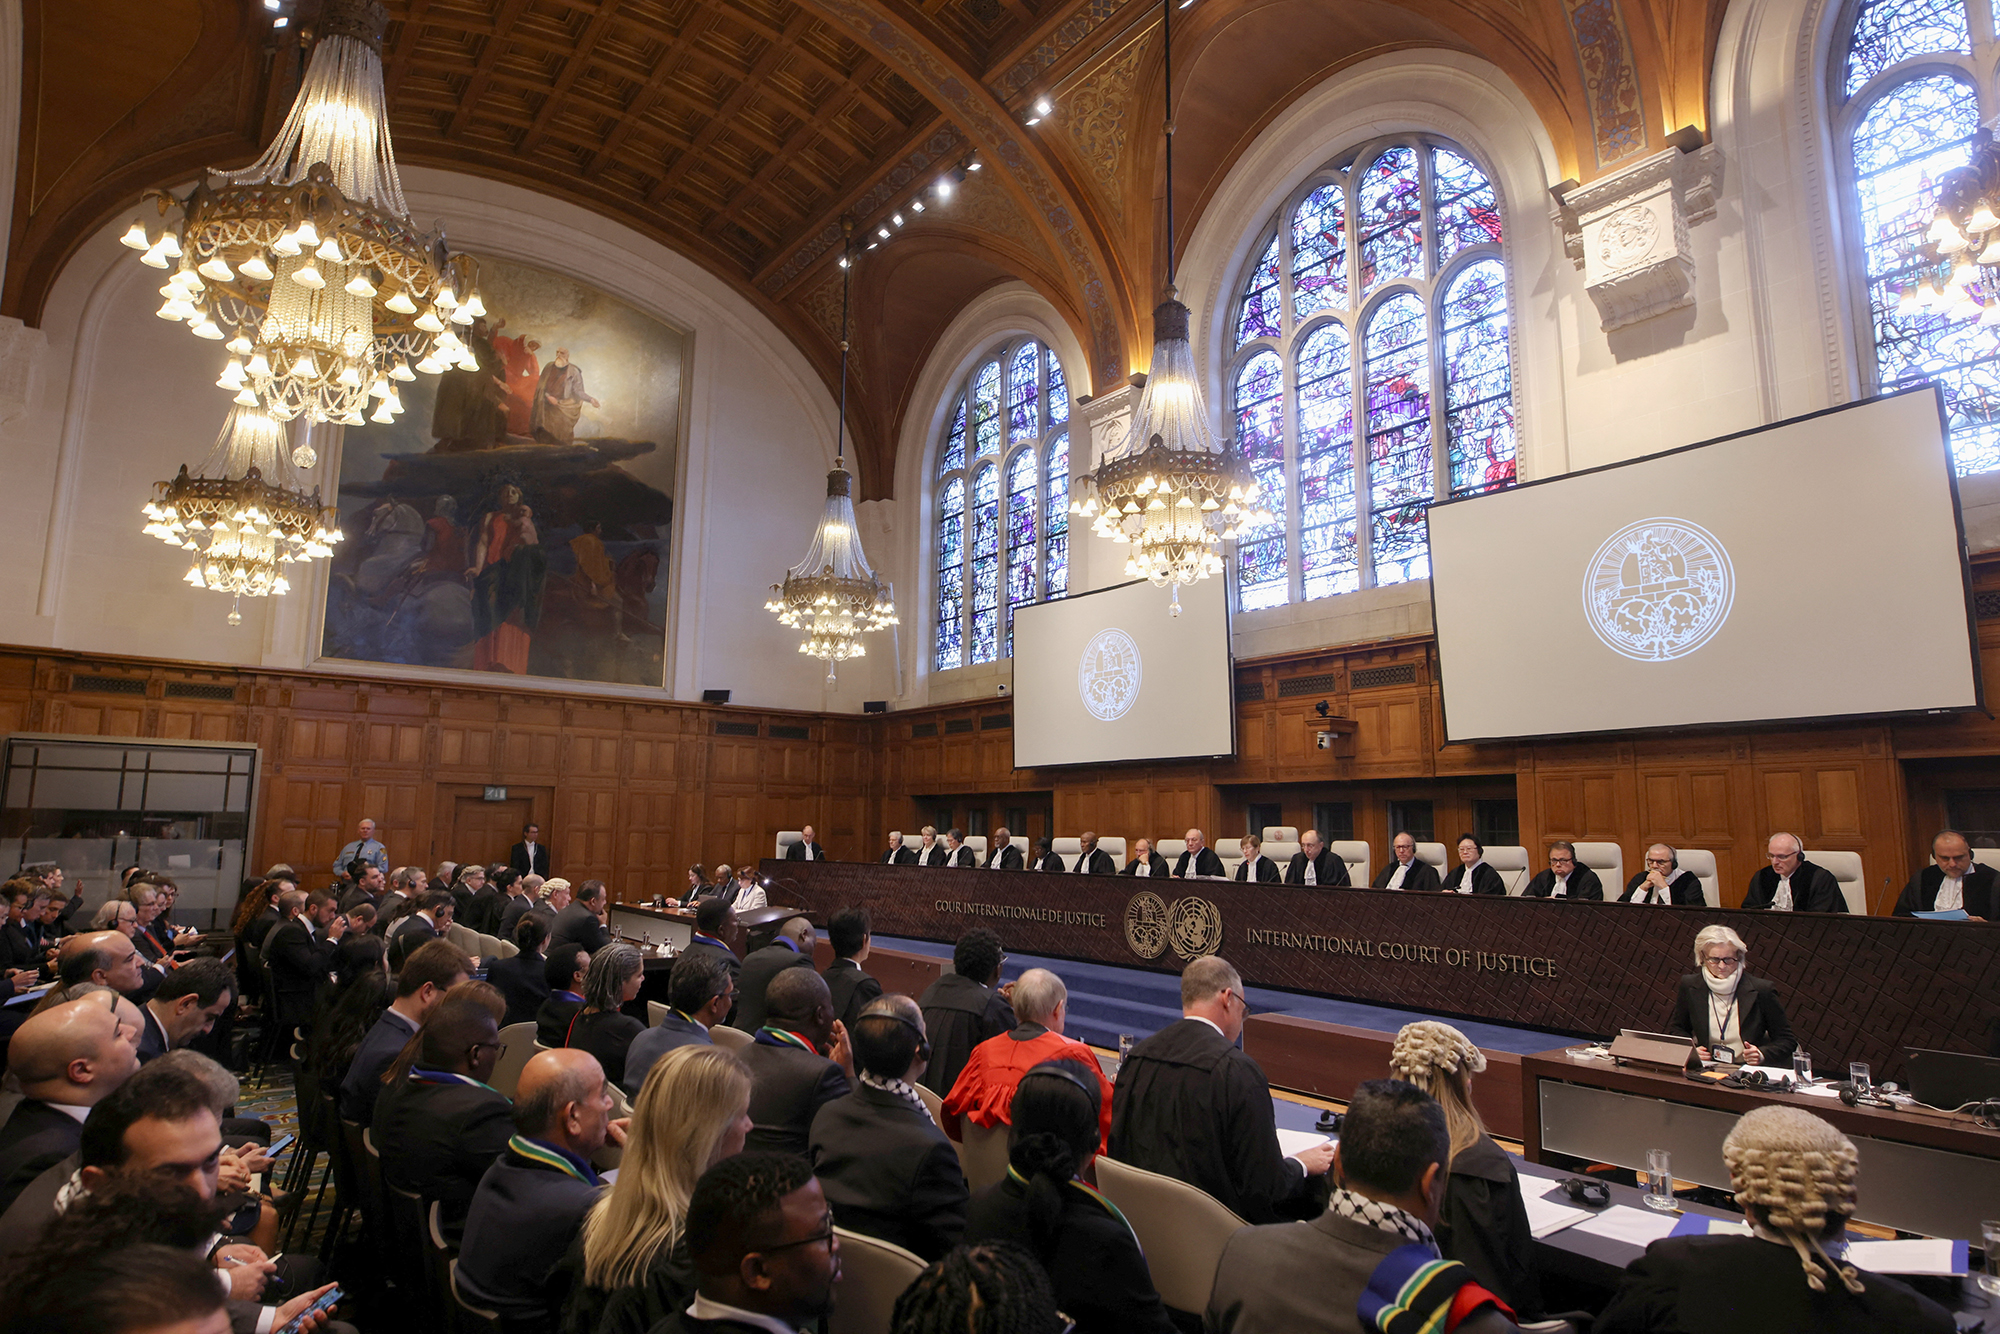 People sit inside the International Court of Justice (ICJ) in The Hague, Netherlands, on January 11.